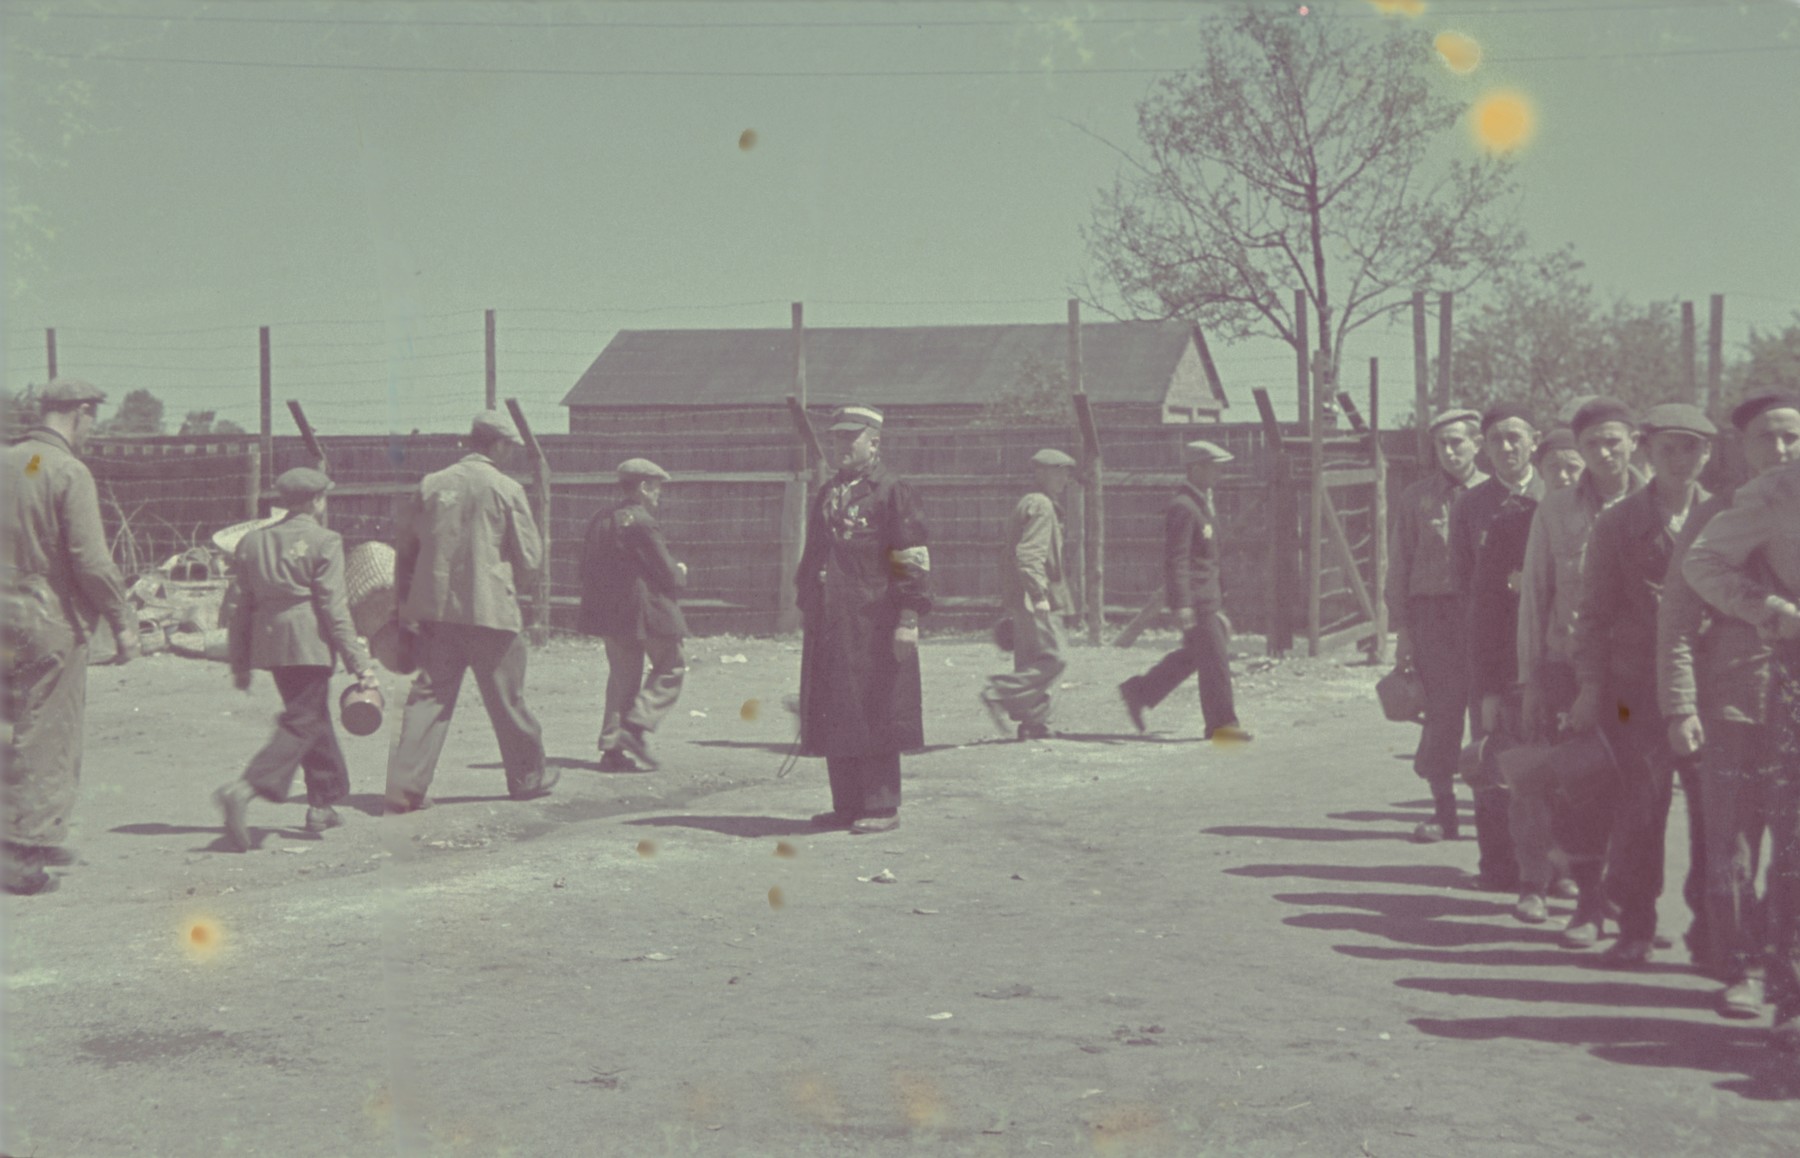 Workers line up with their lunch buckets on the supervision of a Jewish policeman in the Lodz ghetto.

Original German caption: "Rationier, Mittagsessen" (lunch rations).